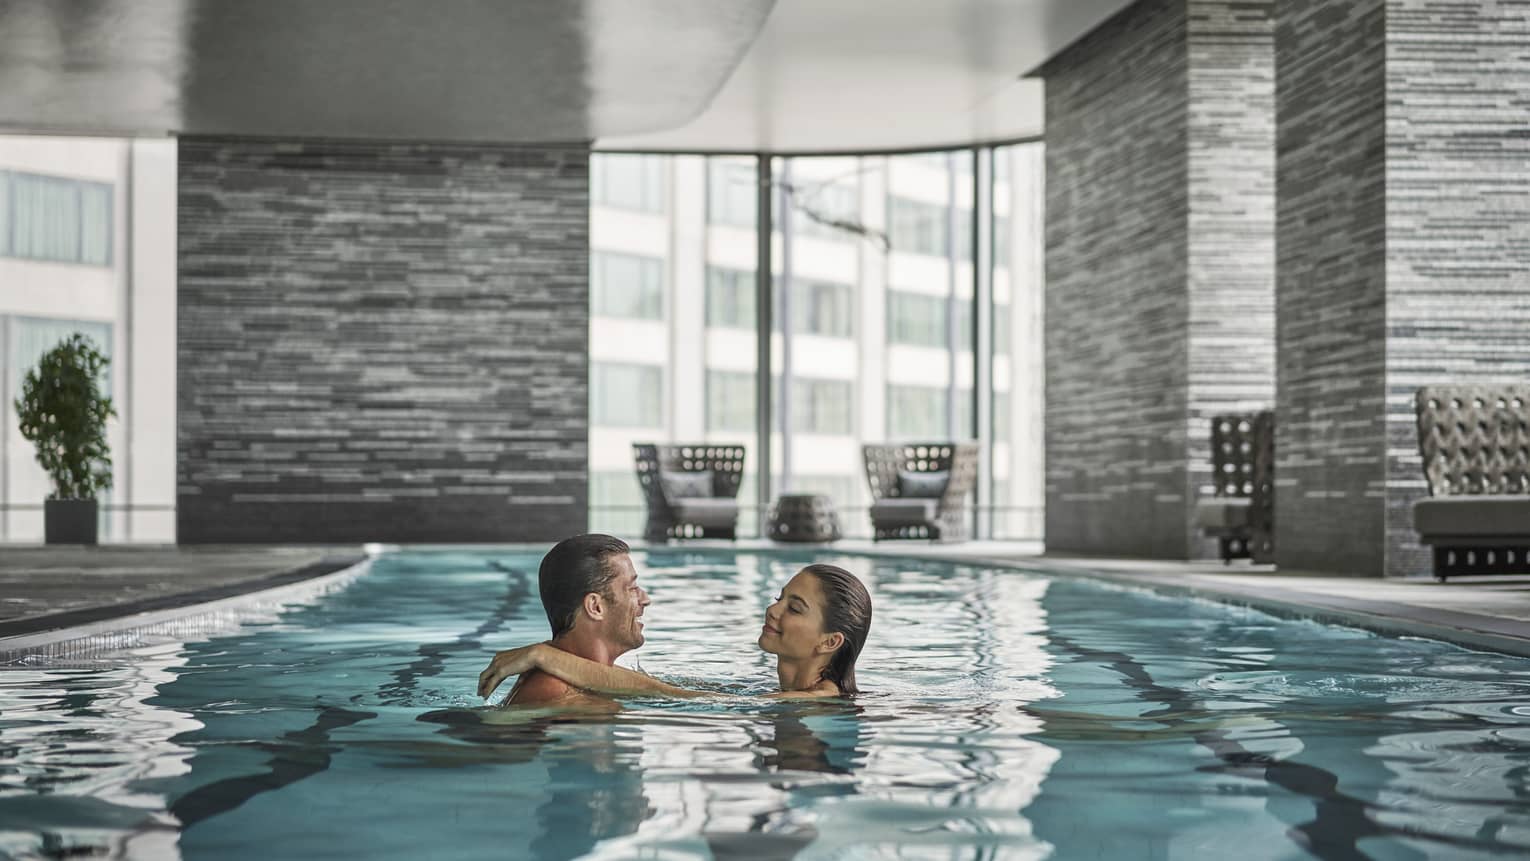 A couple embraces in a lap pool; behind them, floor-to-ceiling windows reveal an urban landscape.